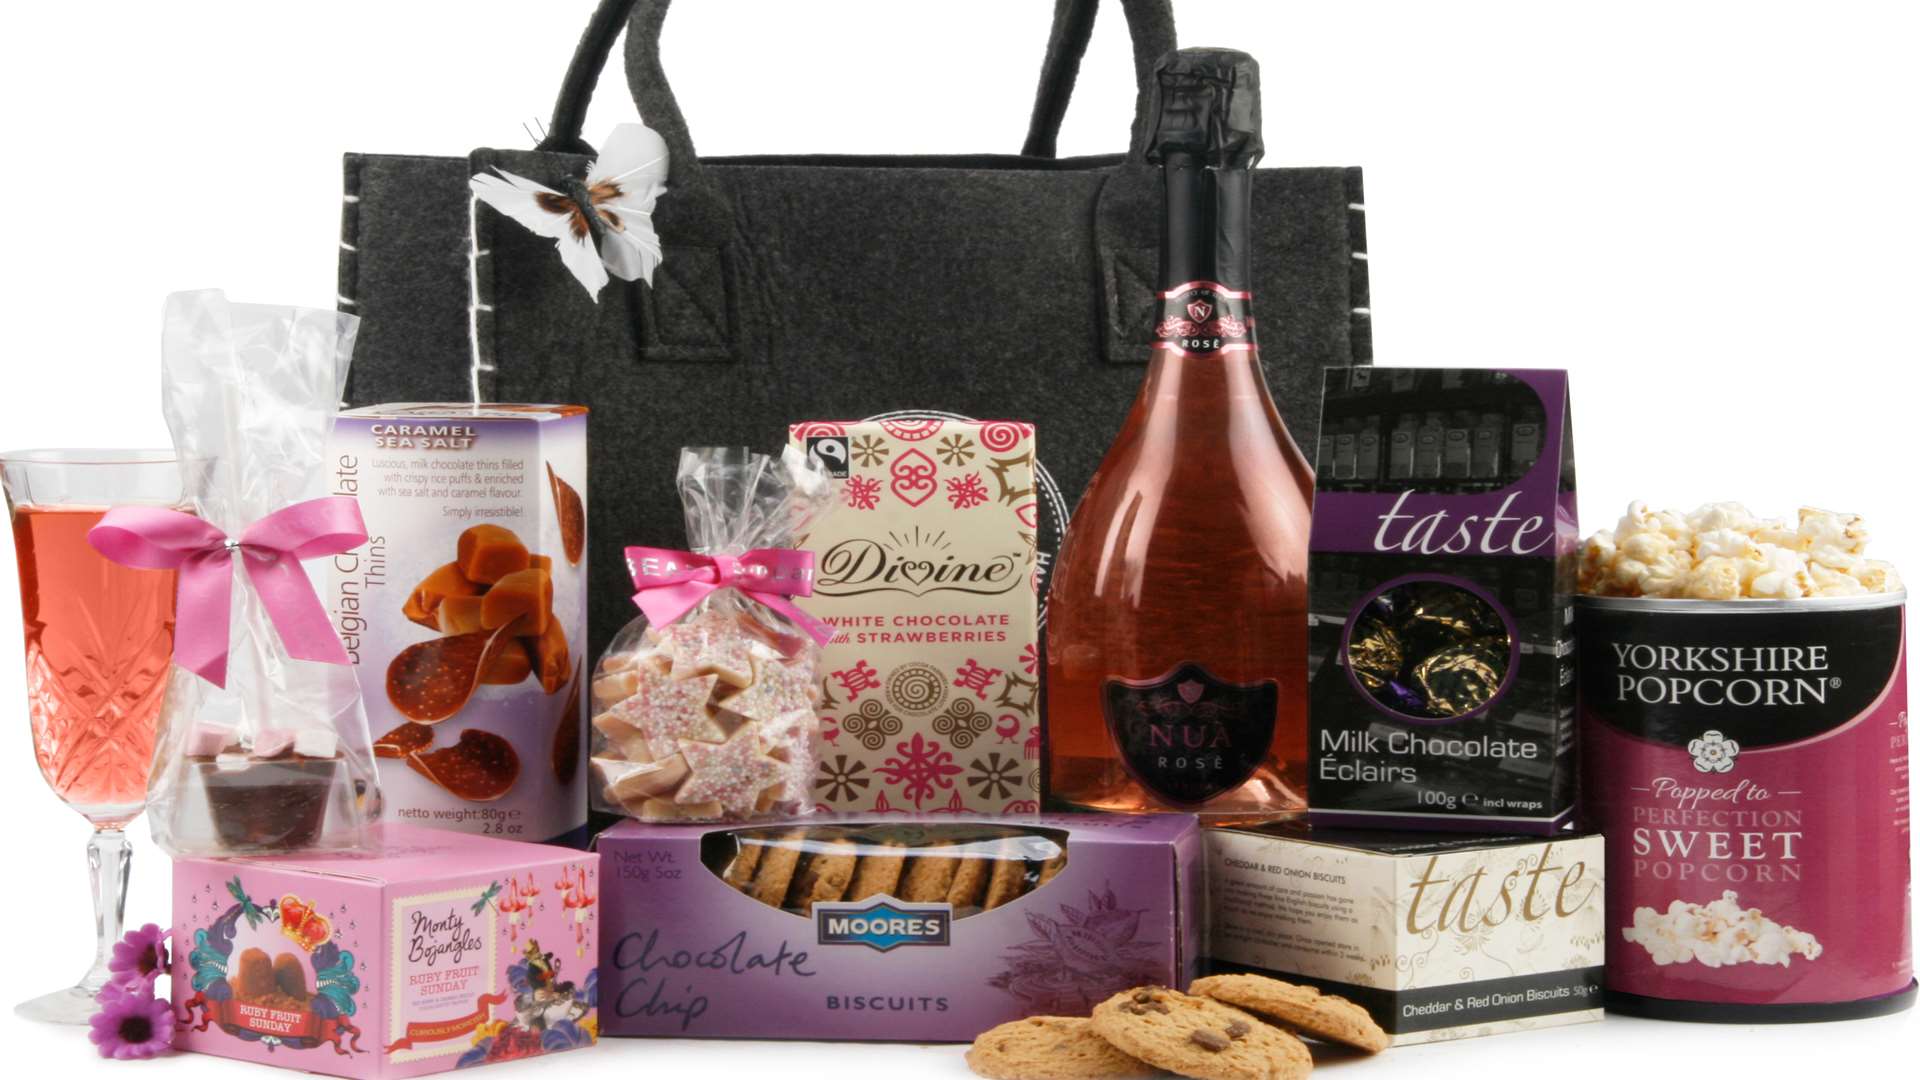 Spicers of Hythe make luxury hampers. This luxurious hamper with treats including strawberry white chocolate to fruit Sunday truffles costs £41.24